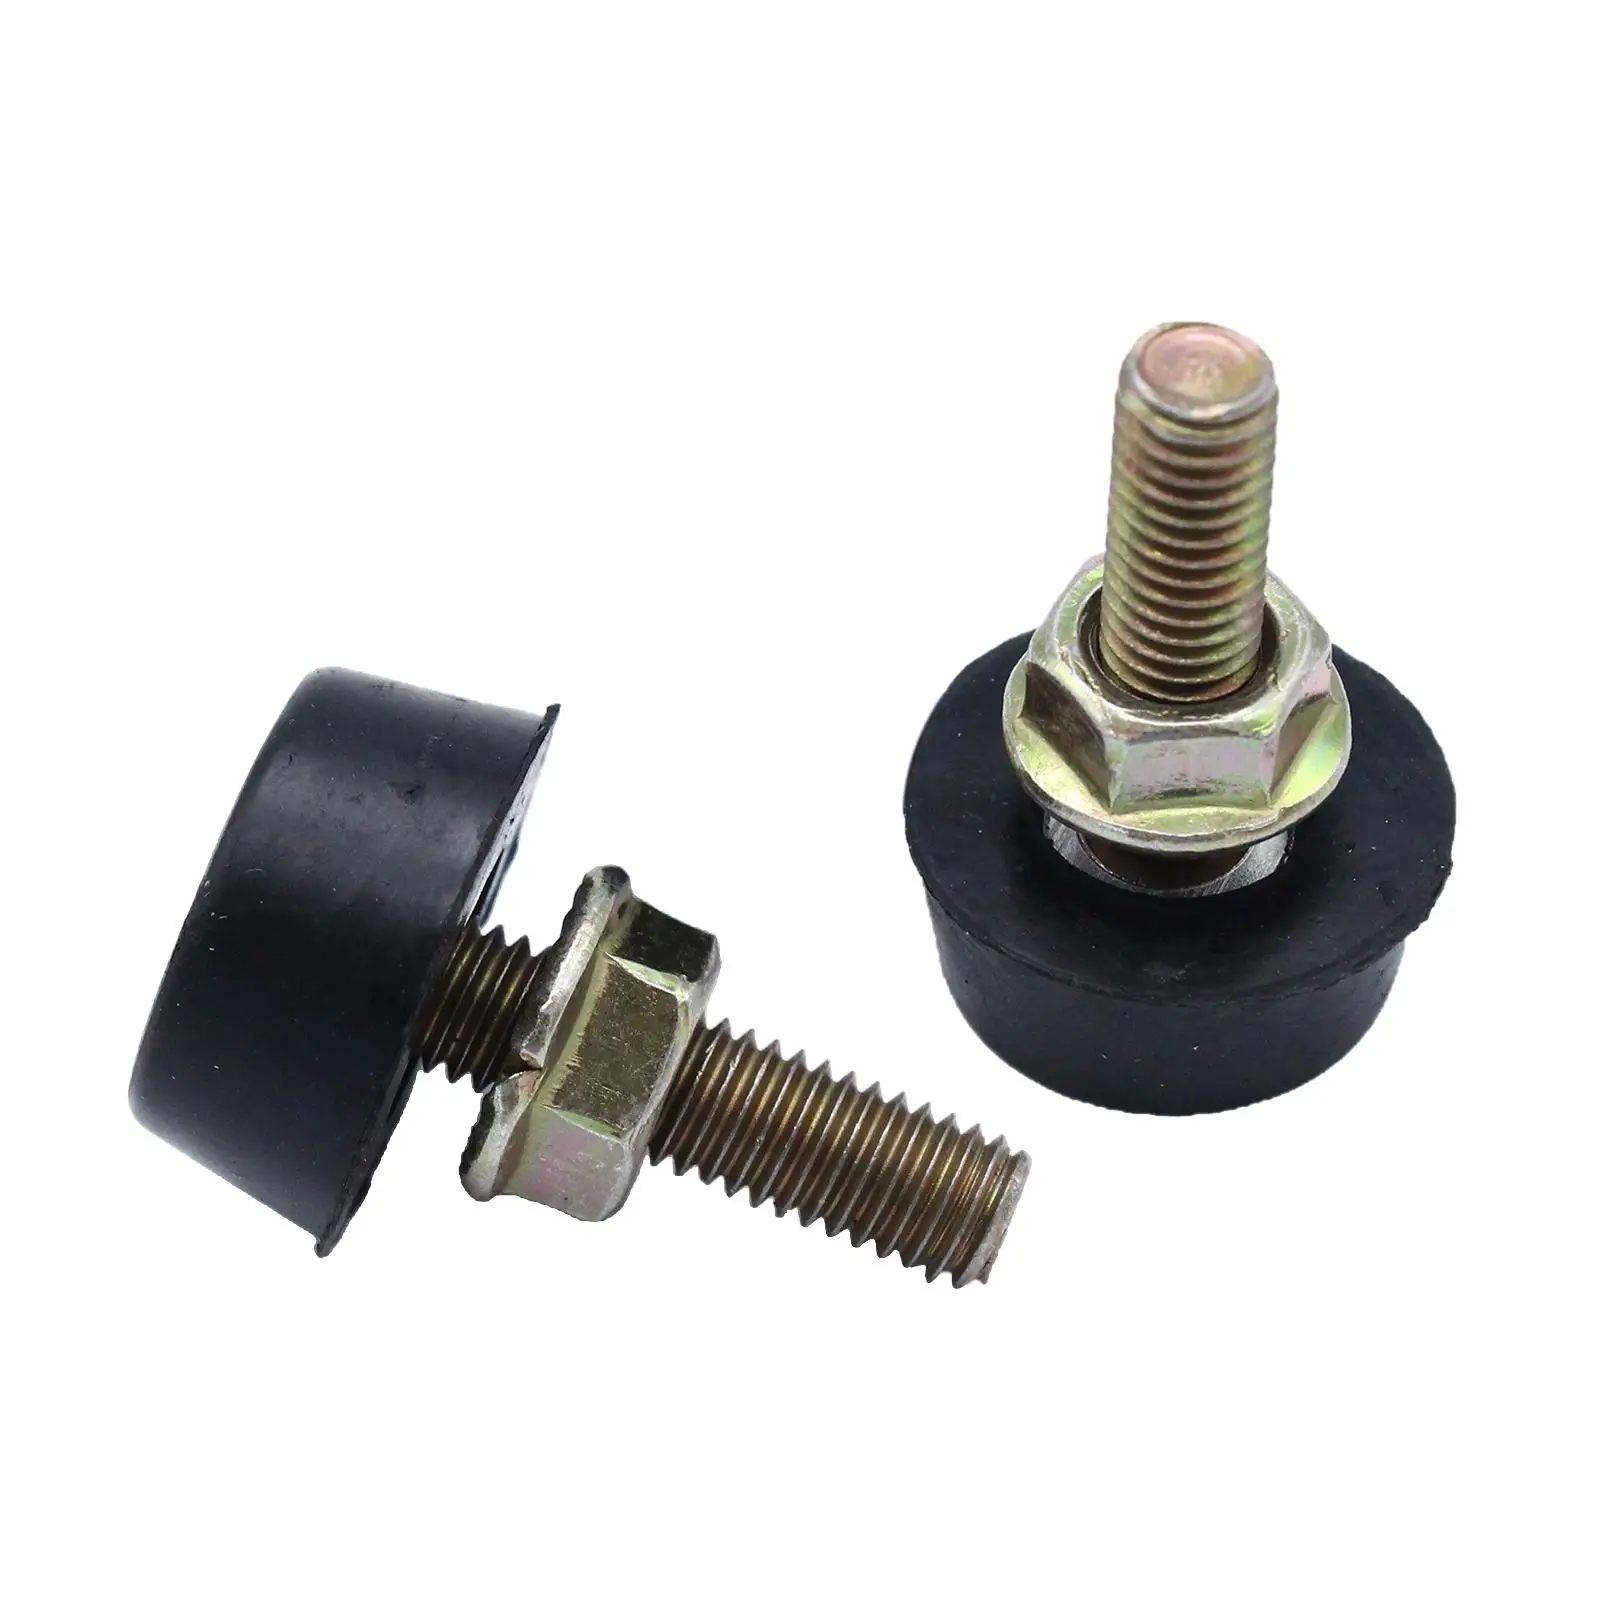 2 Pieces Bonnet Stop Adjuster fits for Ford  62840-H8500 BSANS1GP-1 ,Easy to Install, Professional Accessories